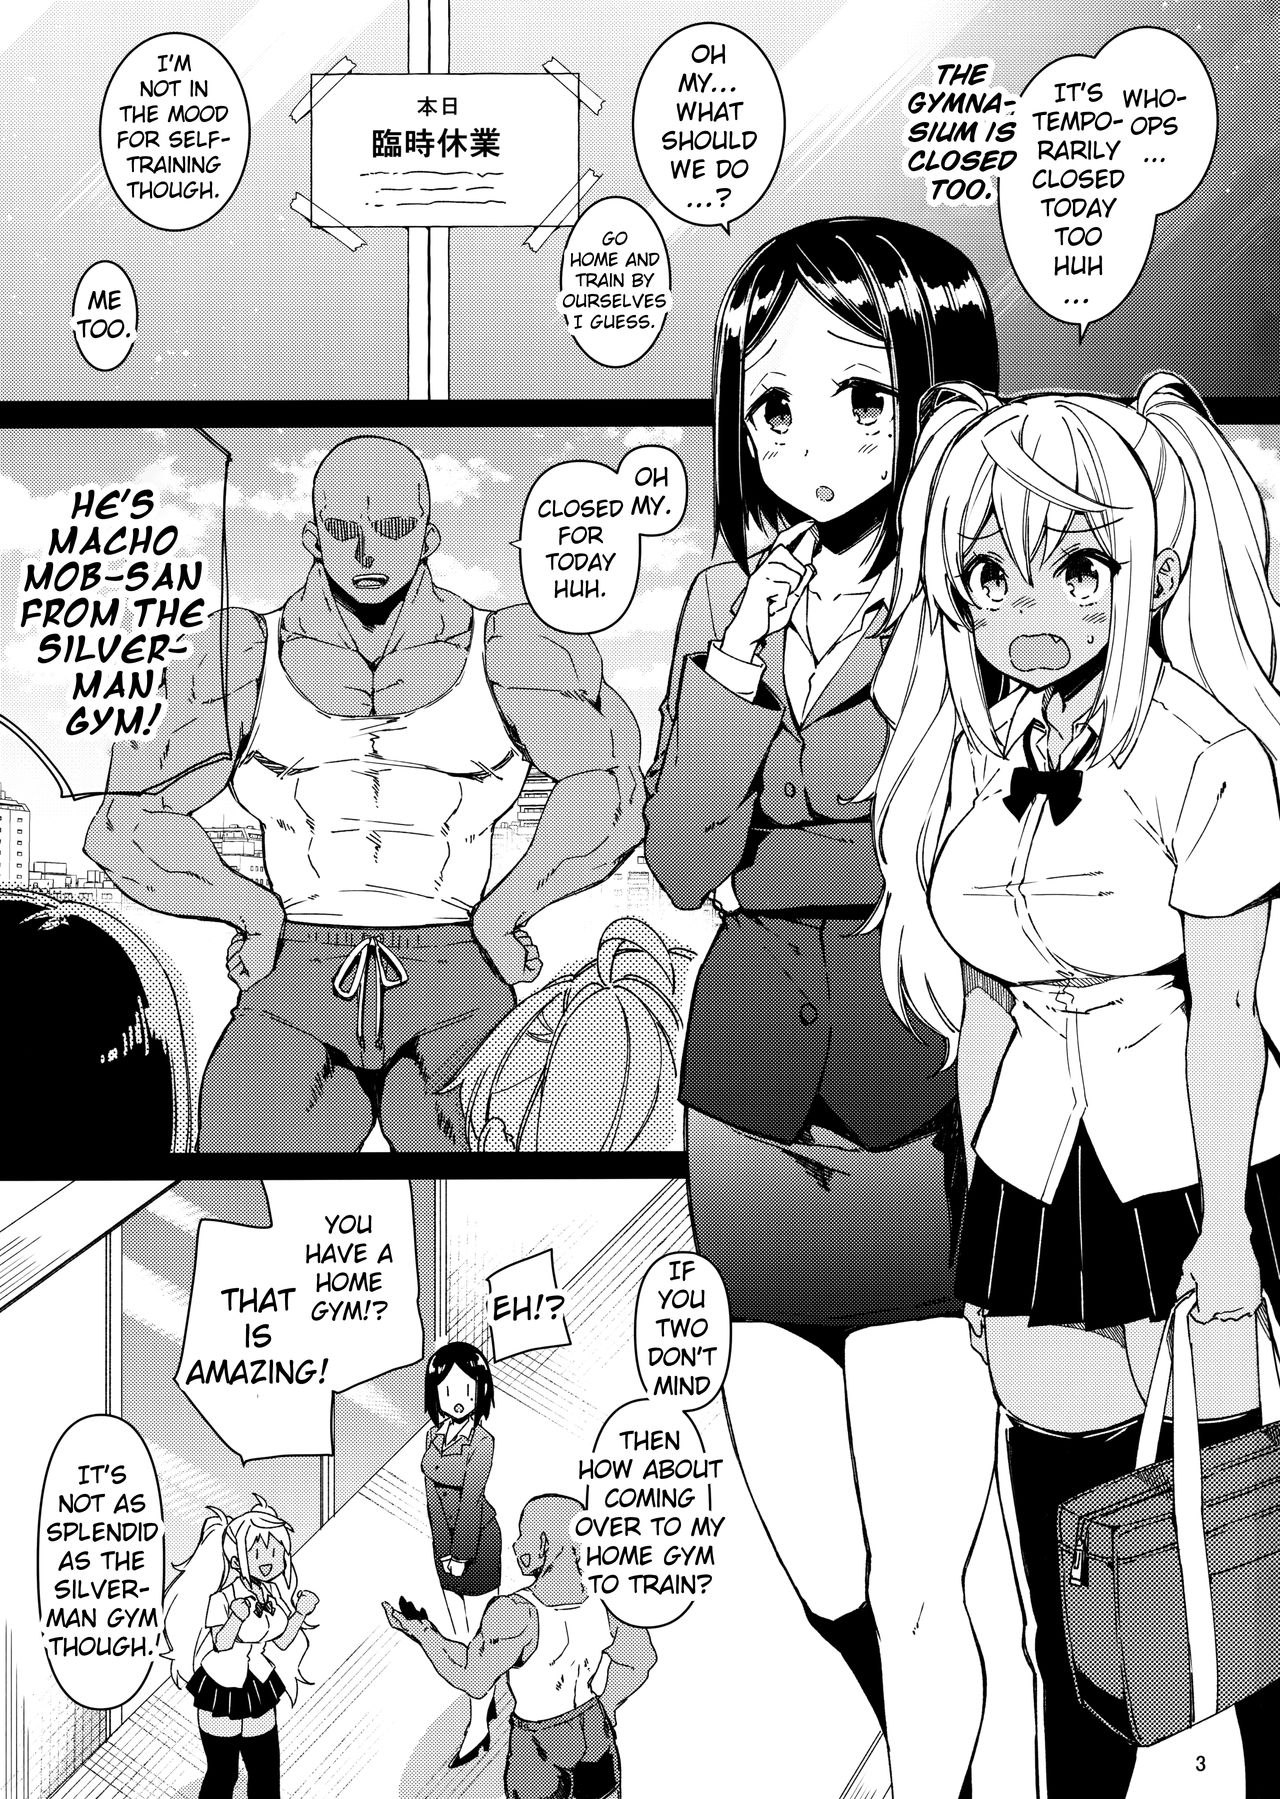 How heavy are the dumbbells you lift porn comic